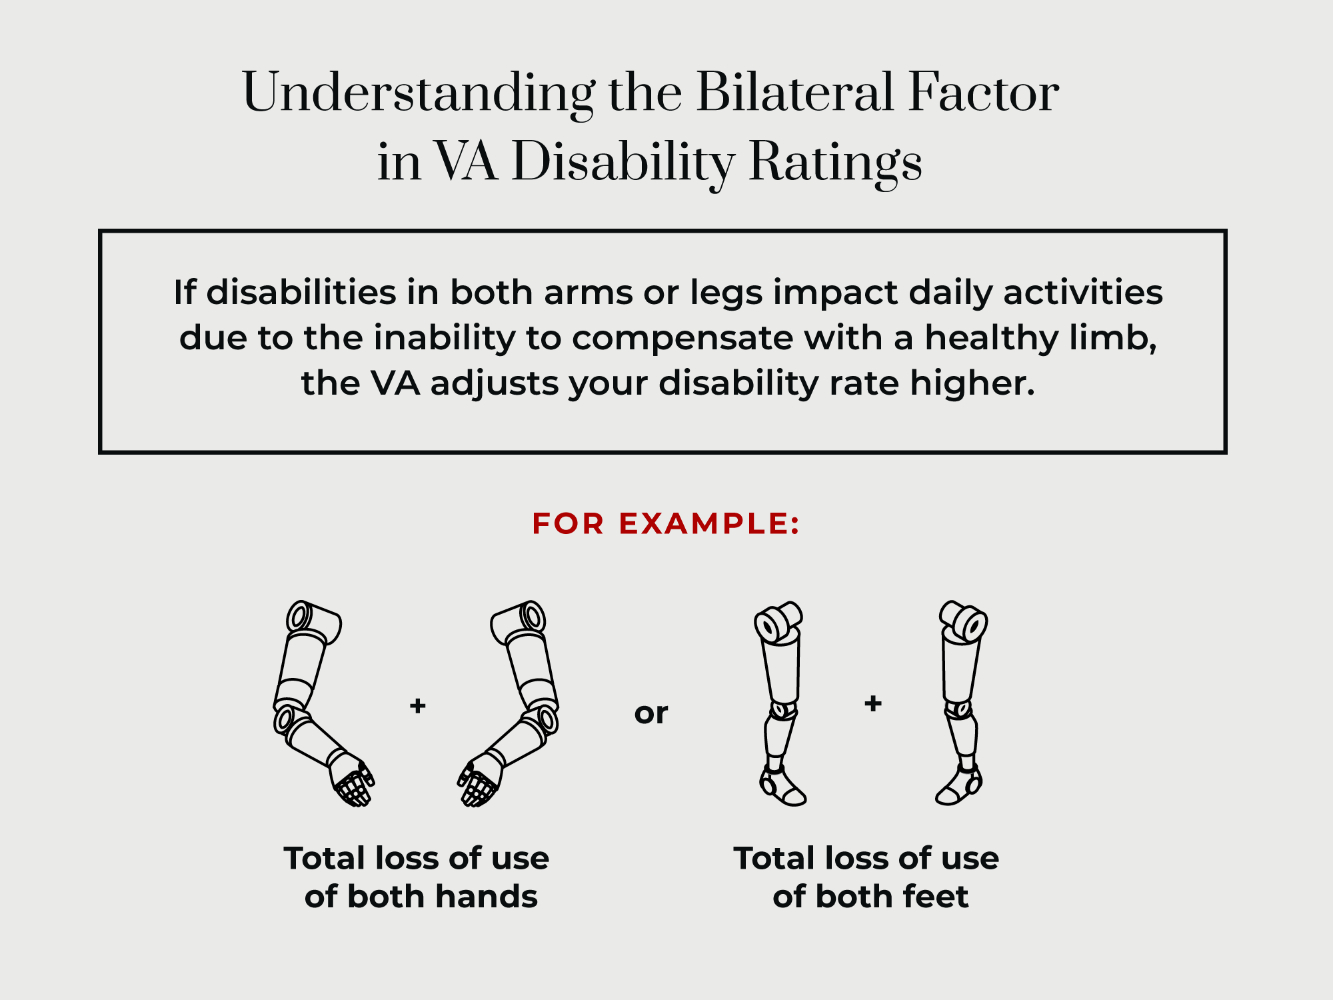 understanding the bilateral factor in VA disability ratings